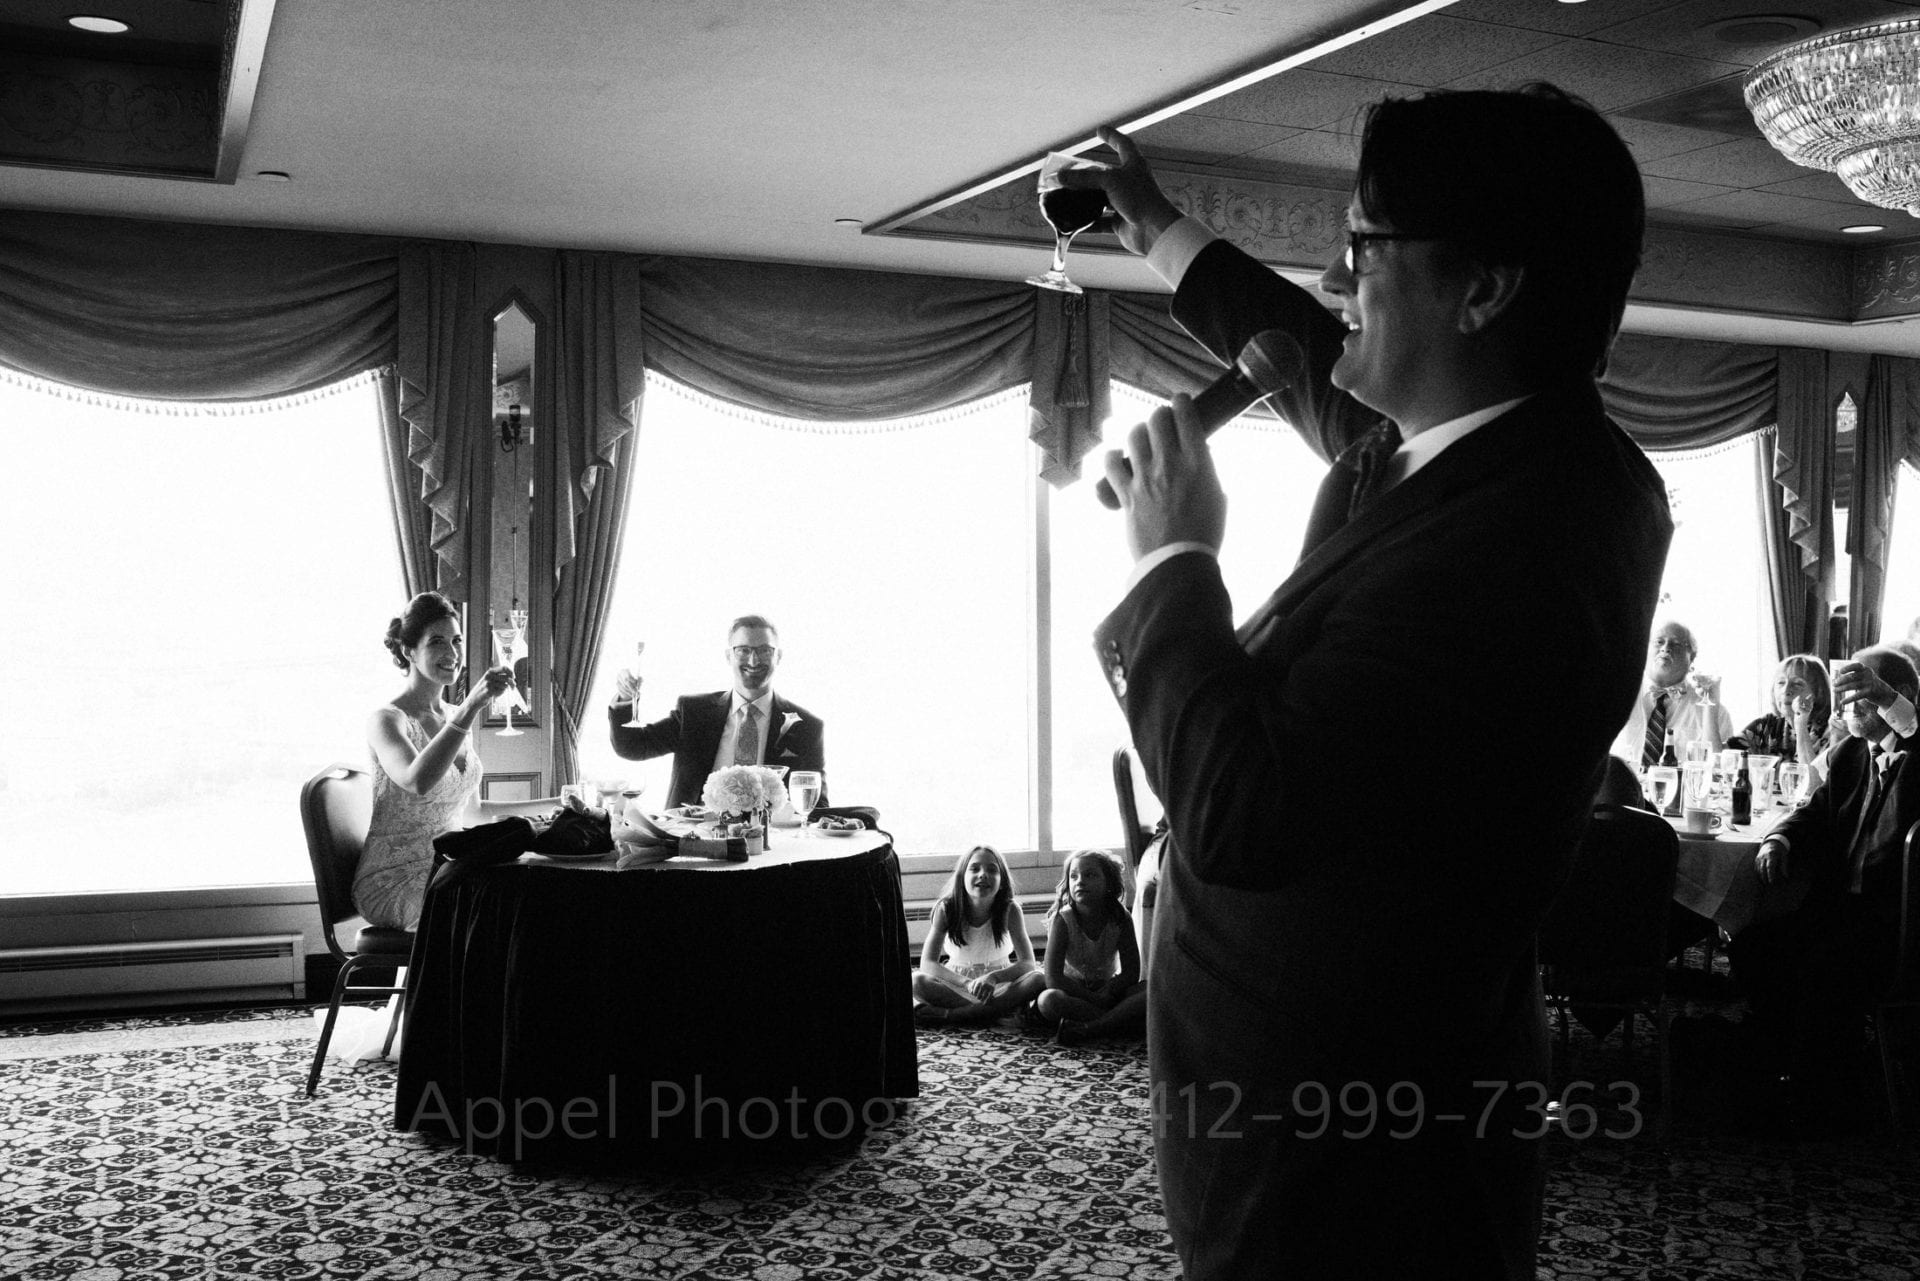 A man lifts a glass of wine as he toasts a bride and groom seated at a table in front of large windows.